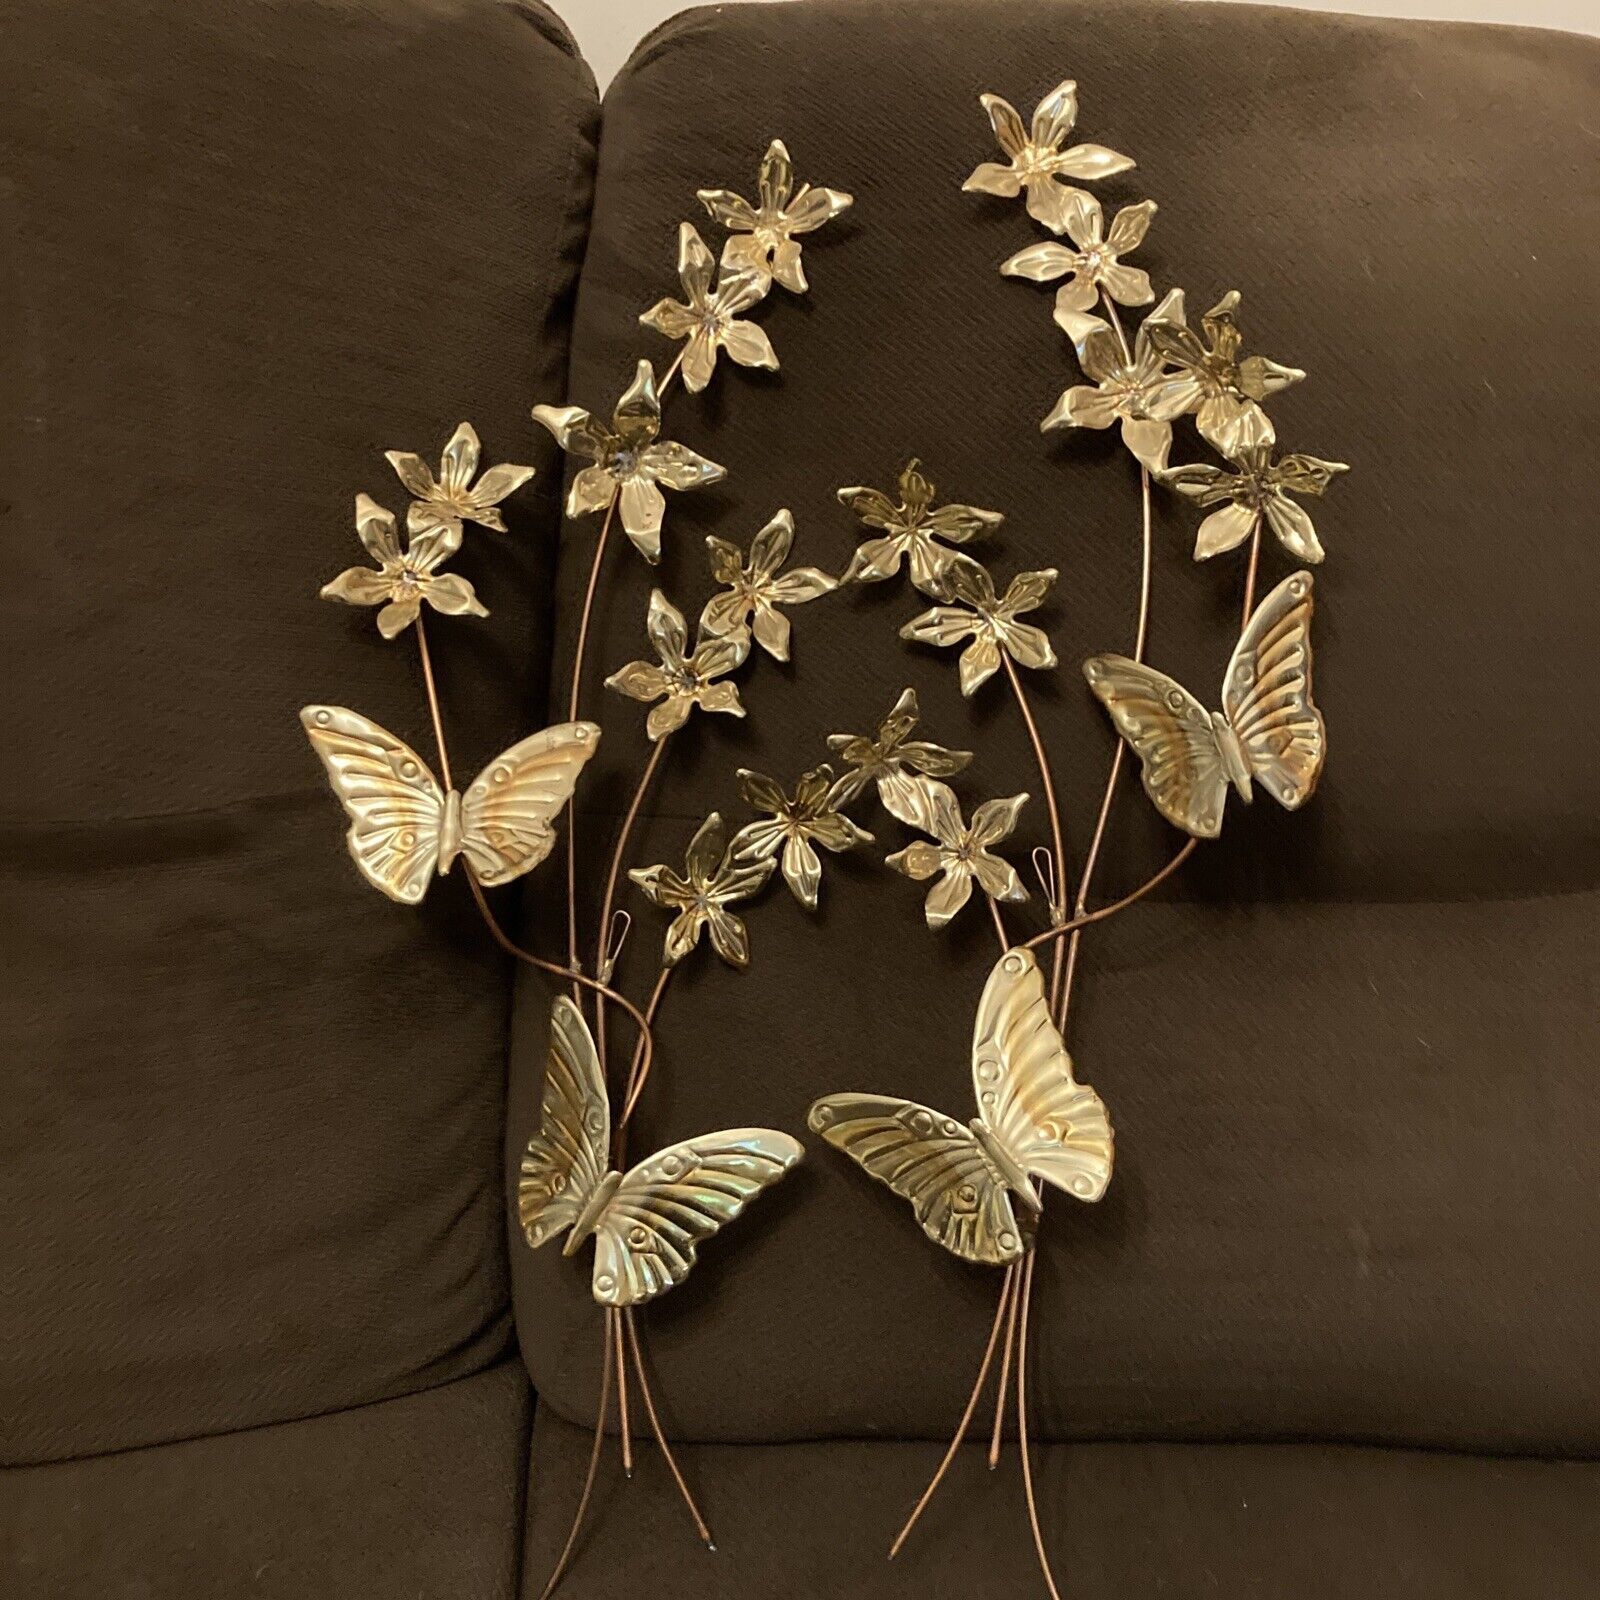 Primary image for 2 Vintage Wall Hanging Butterflies & Flowers Brass Copper Metal Art Sculptures